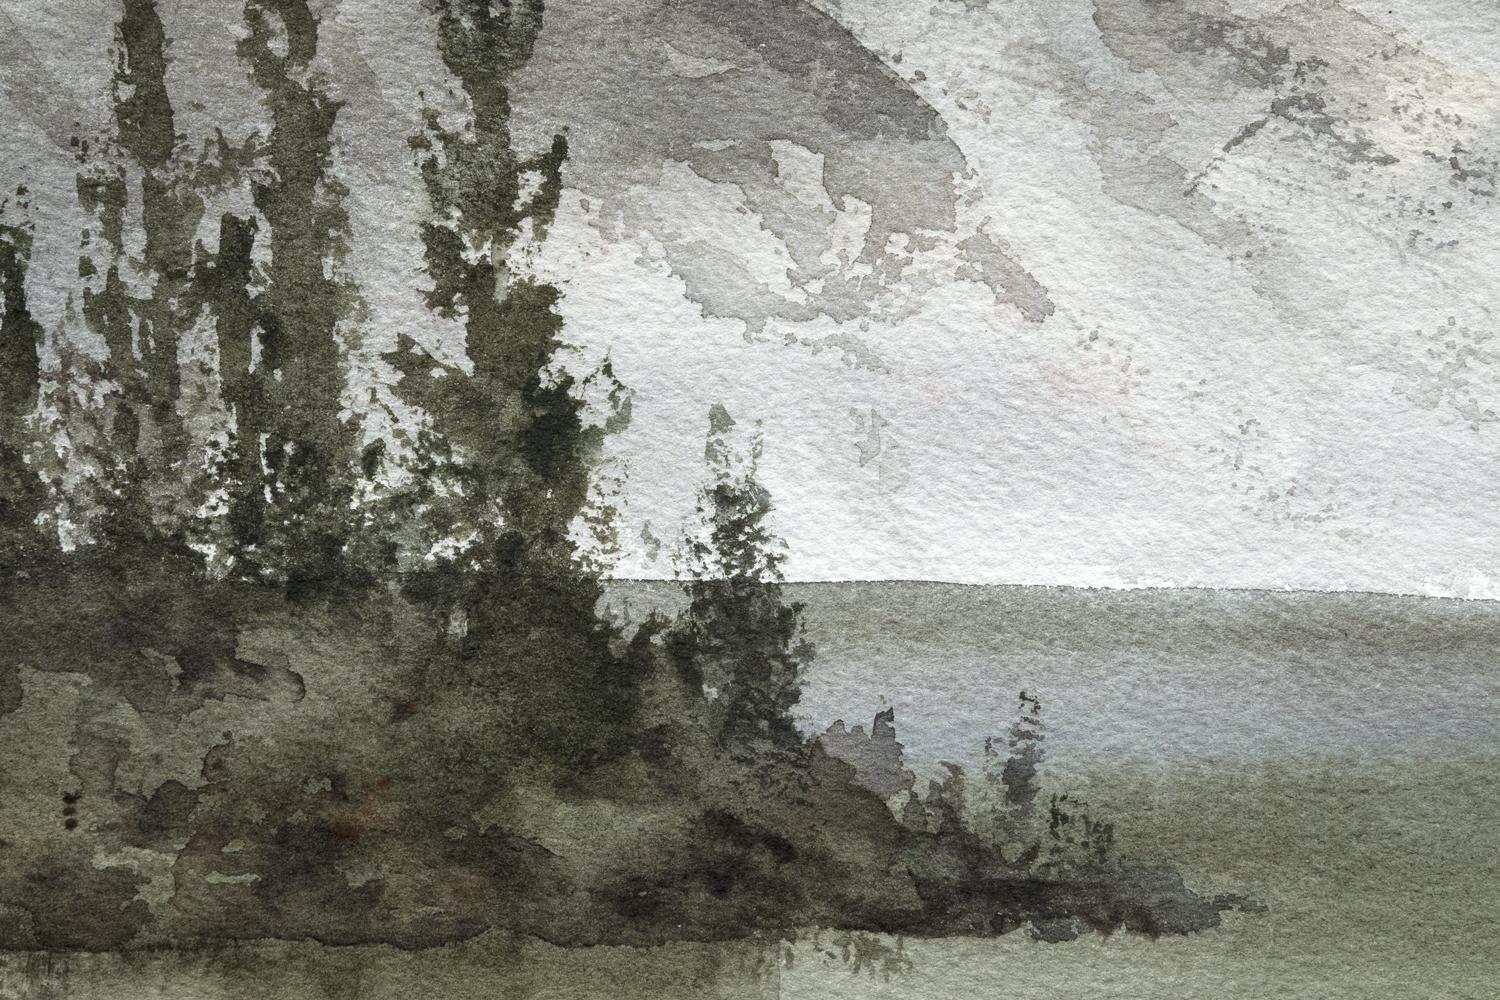 <p>Artist Comments<br>A western landscape featuring a quiet lake at the edge of a mountain range. Delicate, misty clouds pass overhead. 